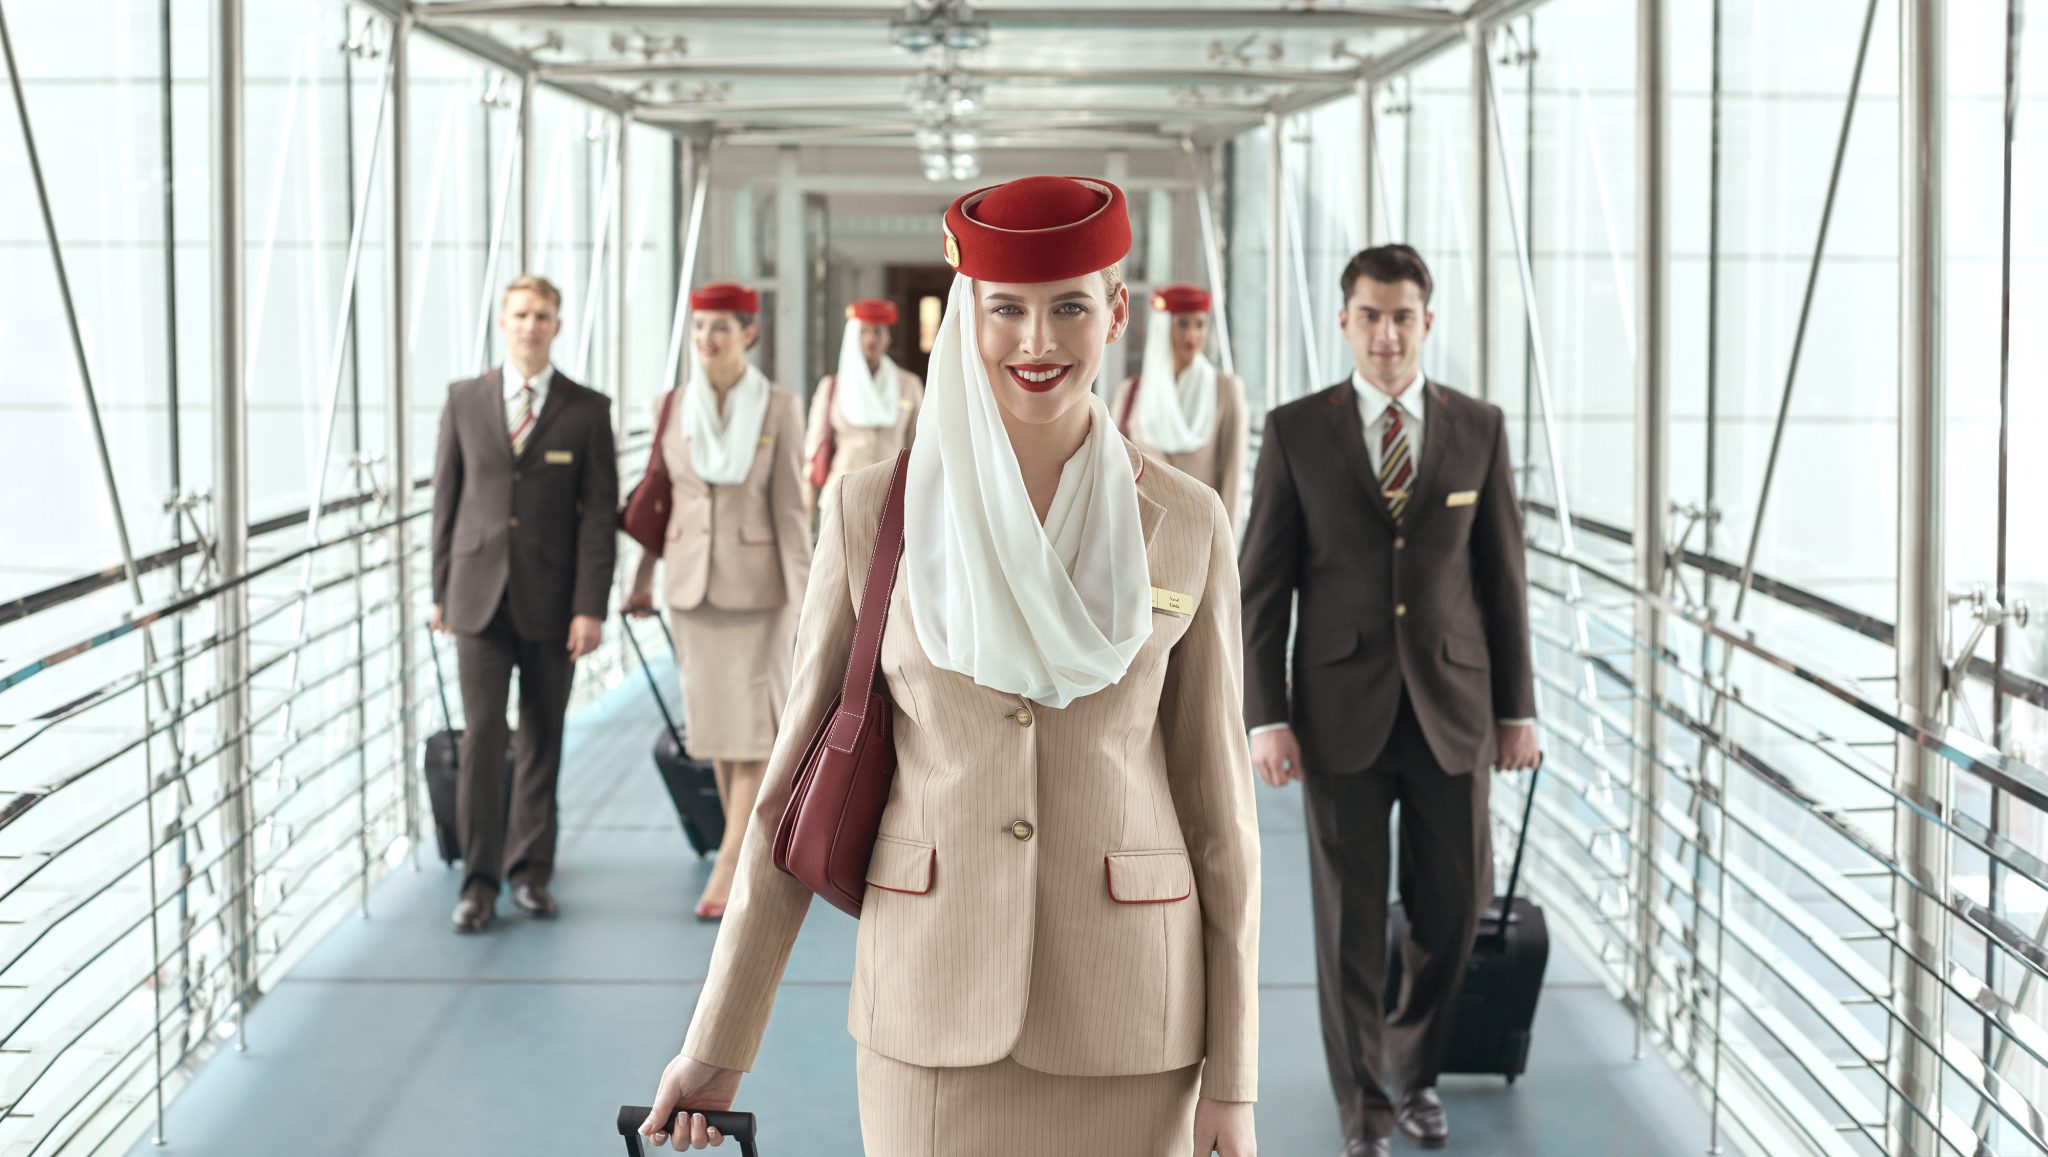 Did Emirates Really Warn Cabin Crew They Face Disciplinary Action for Facial Enhancements?